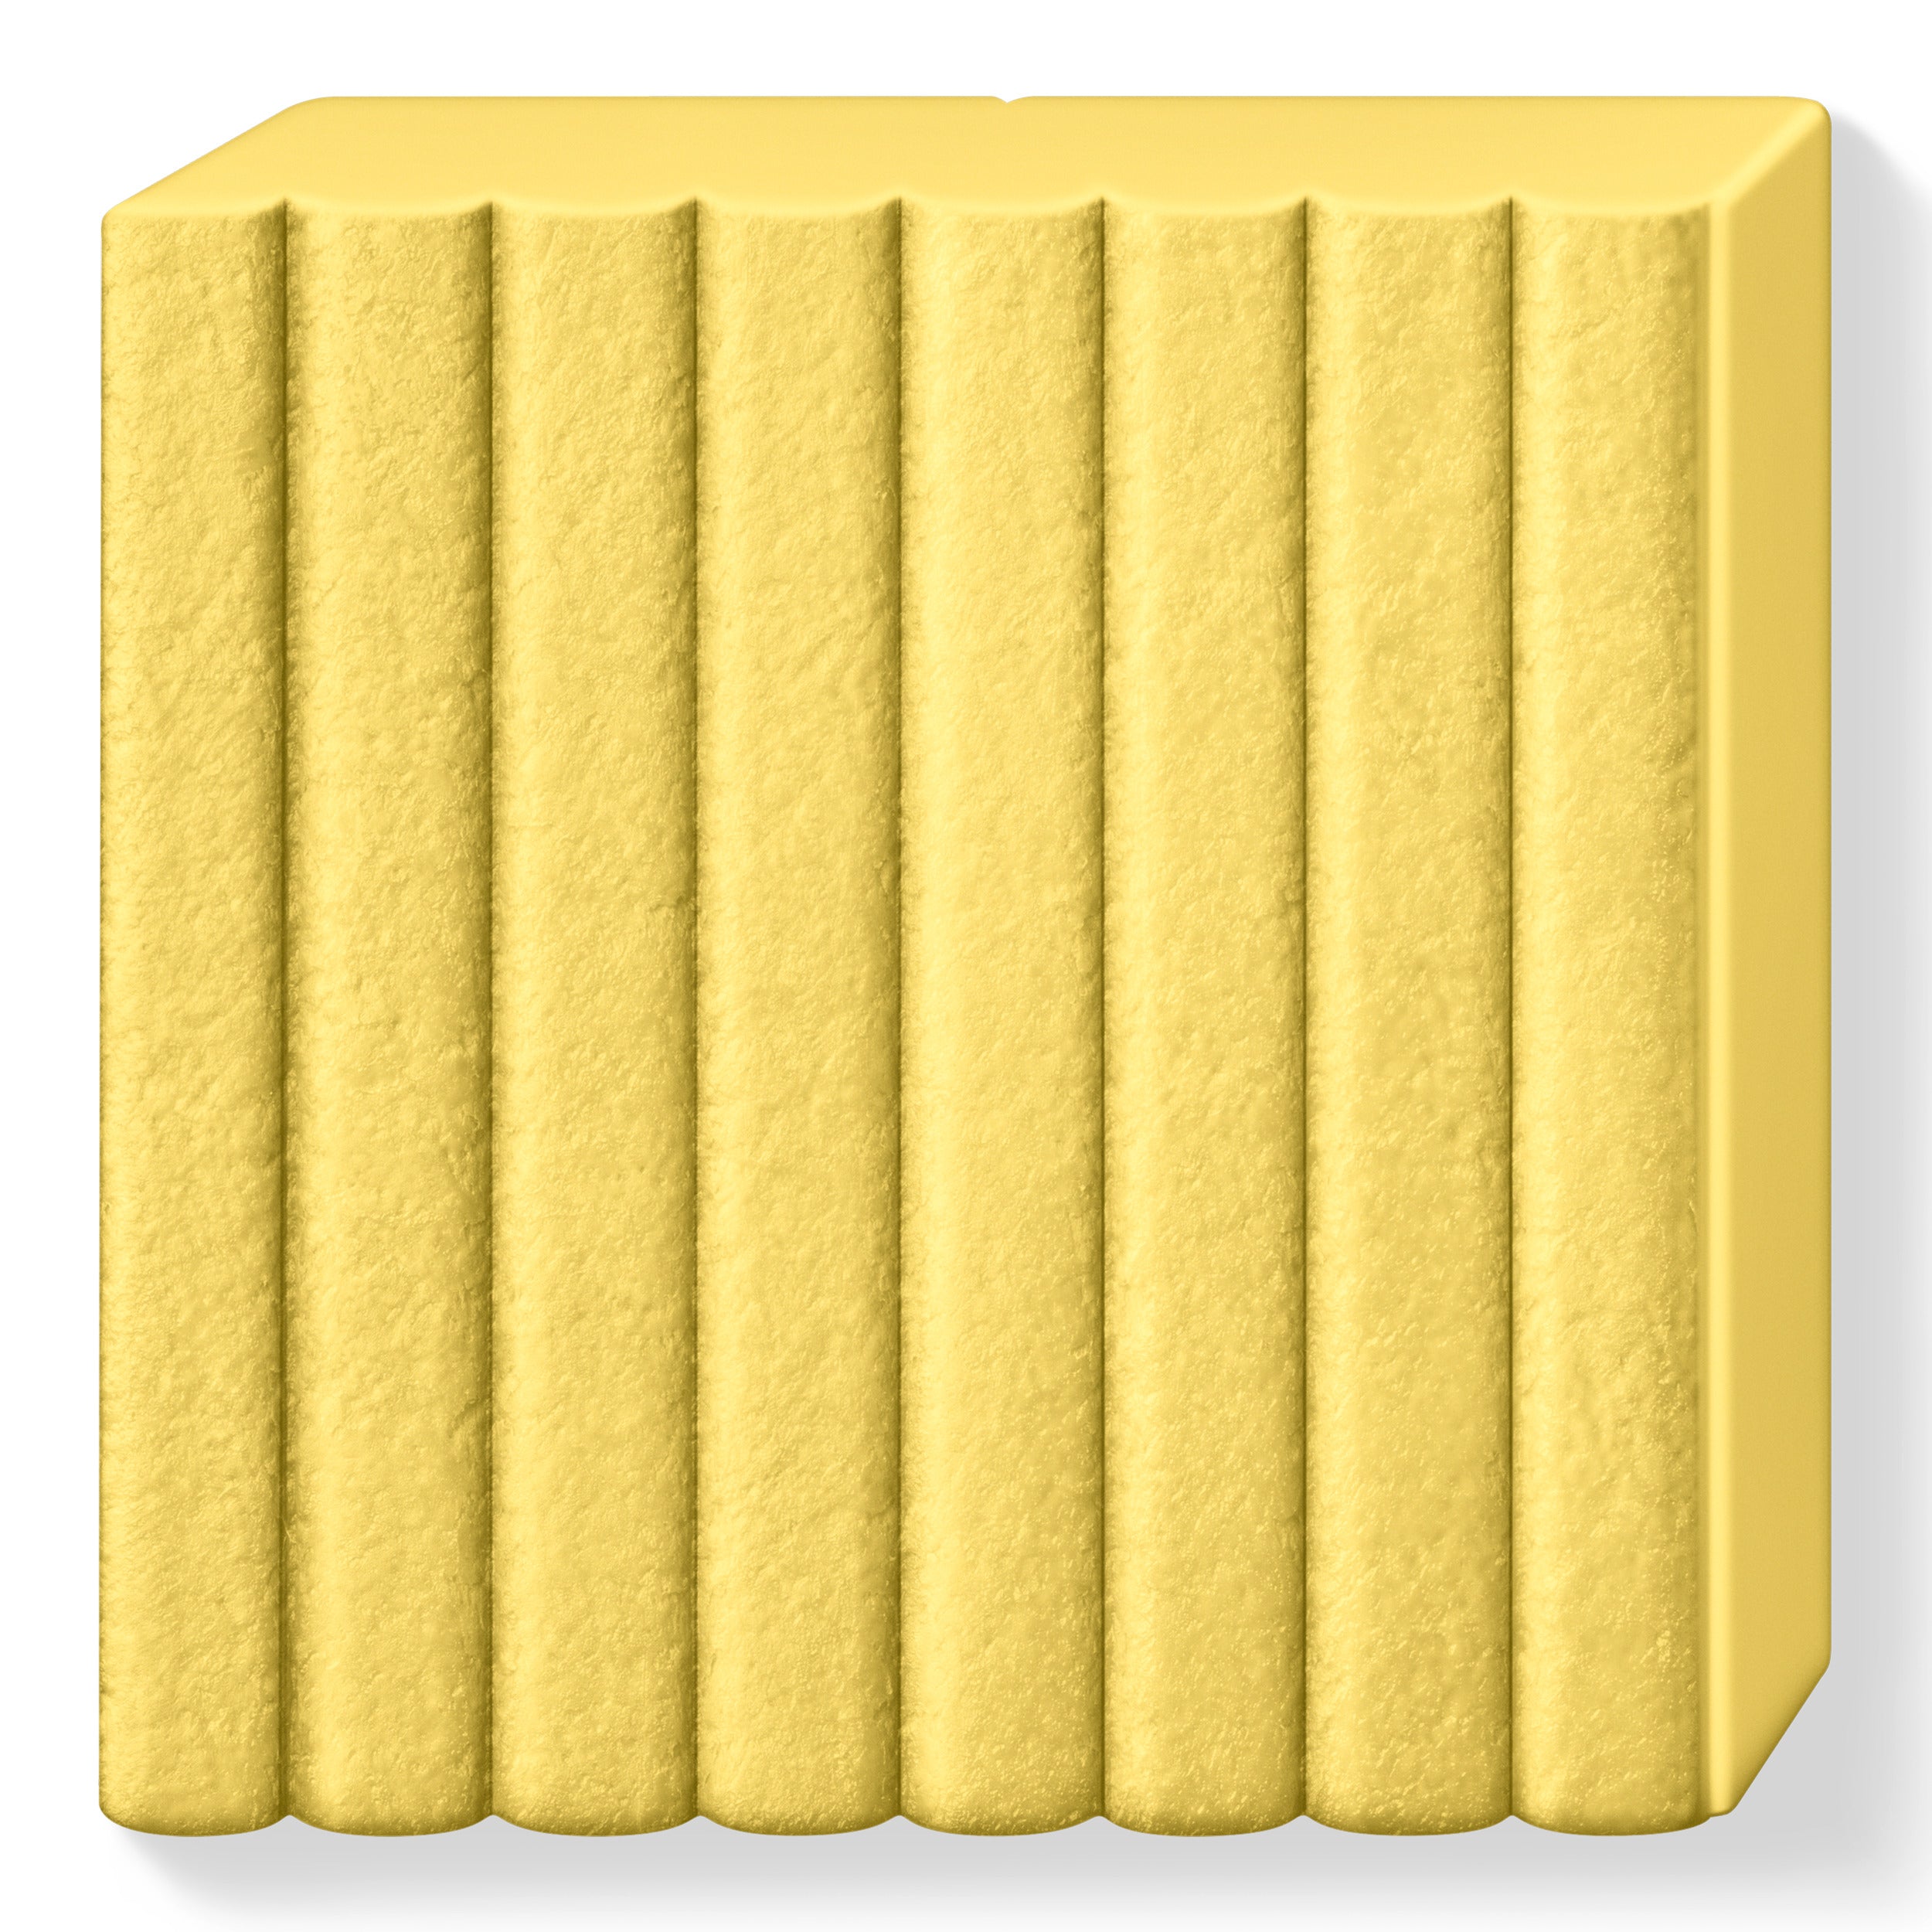 Fimo Leather Effect Polymer Clay Standard Block 57g (2oz) - Safron Yellow